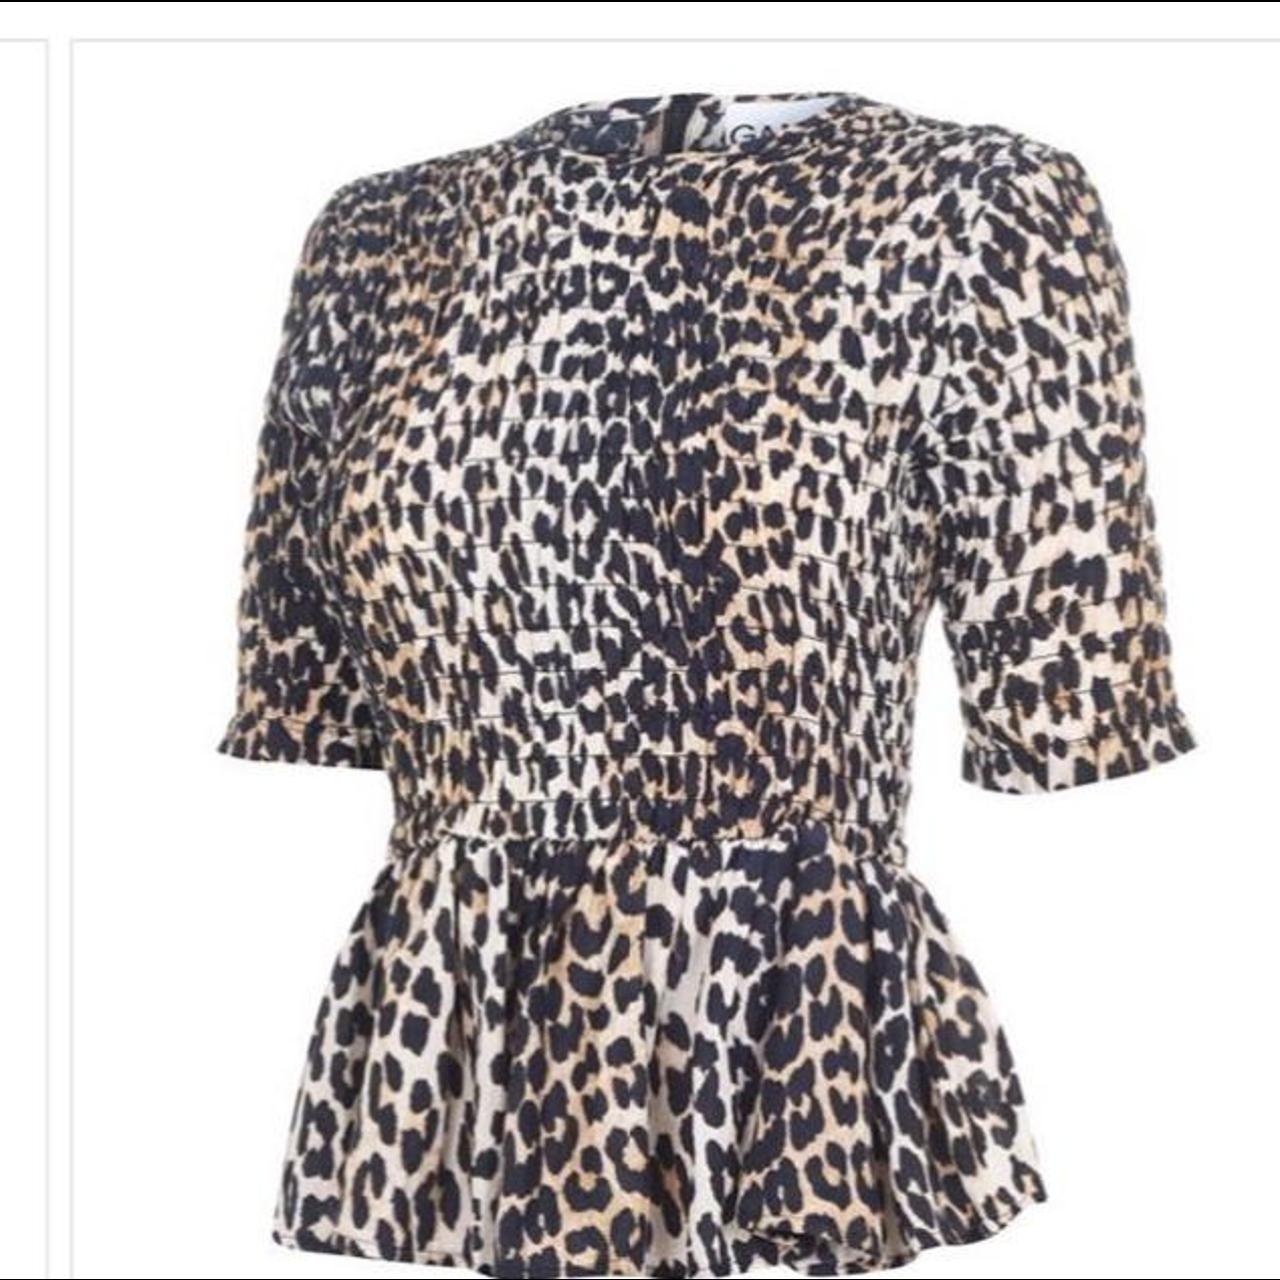 Product Image 1 - Ganni leopard top
Size 38/10
Perfect condition
Shirred